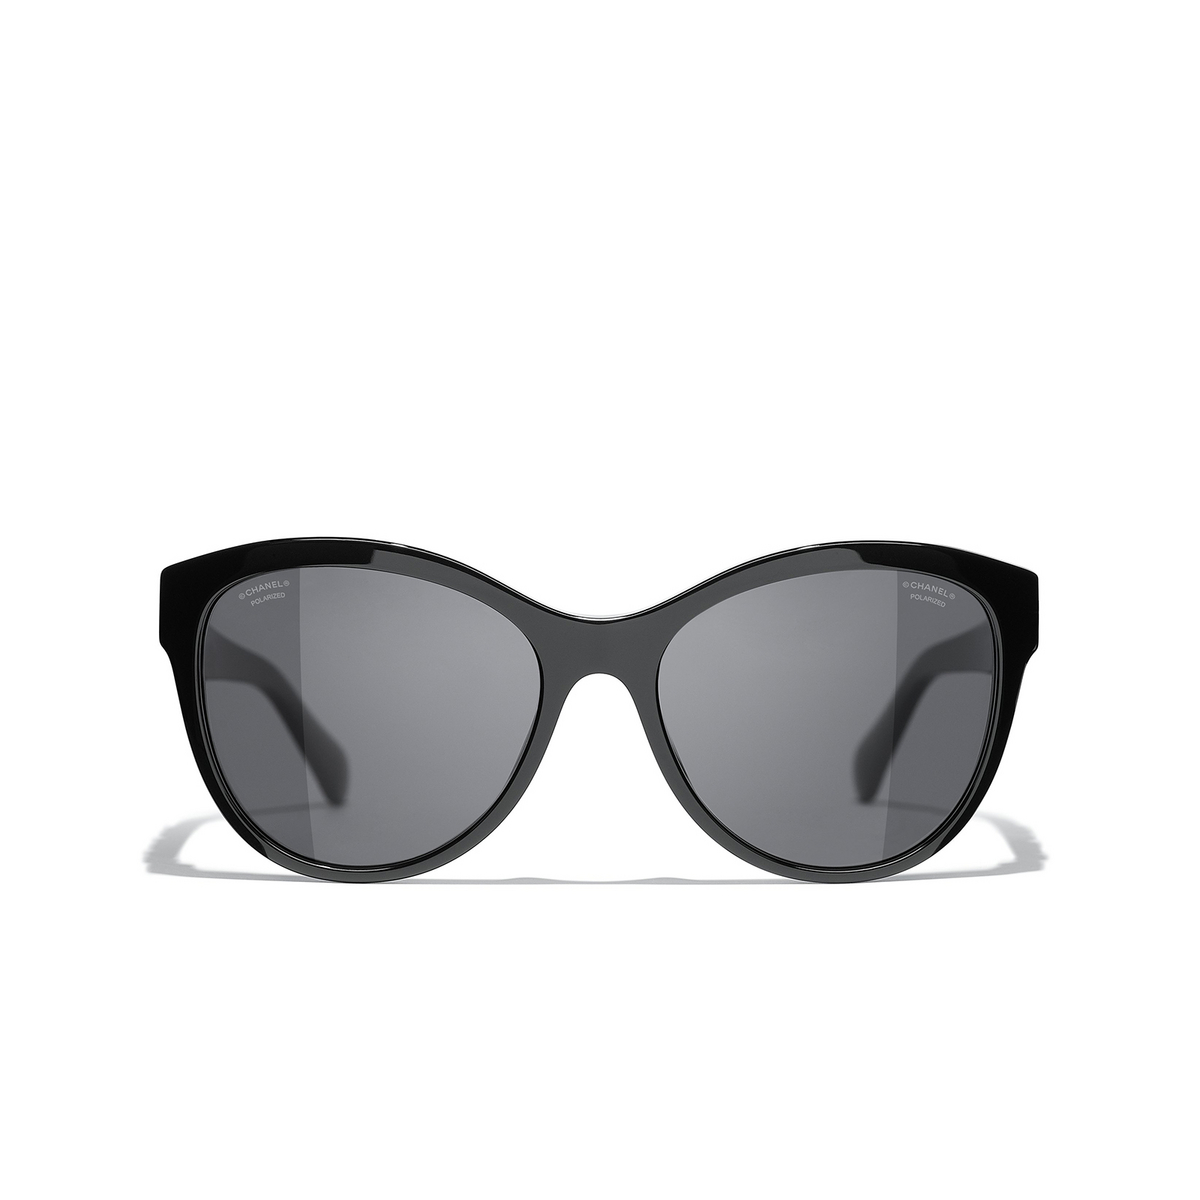 CHANEL butterfly Sunglasses C622T8 Black - front view